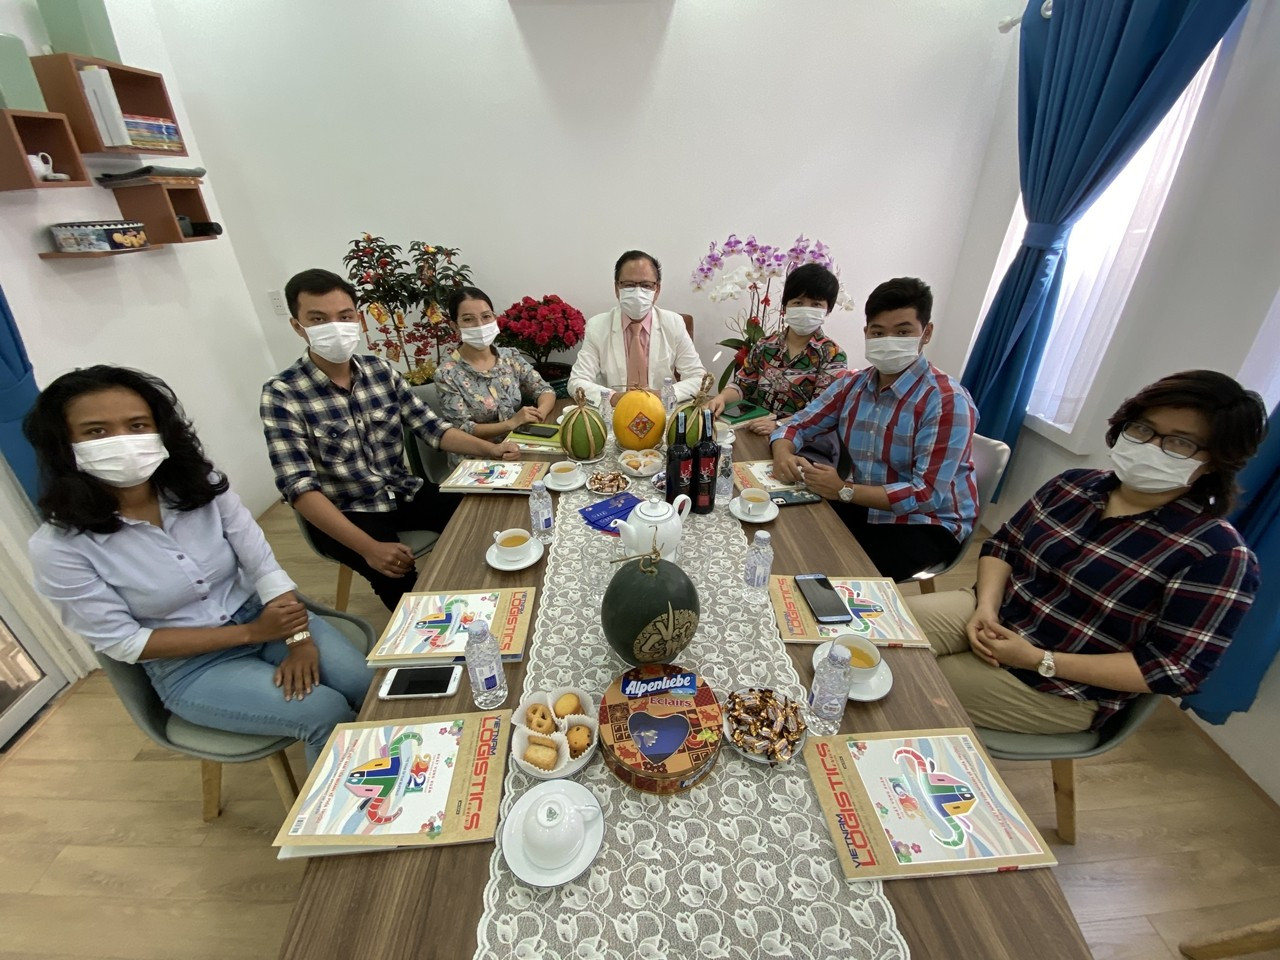 On February 17 (the 6th day of the Lunar New Year), the staff of VLR Magazine have a meeting to start the new working year, ready for the punctual publication of the New Year issue to the readers 